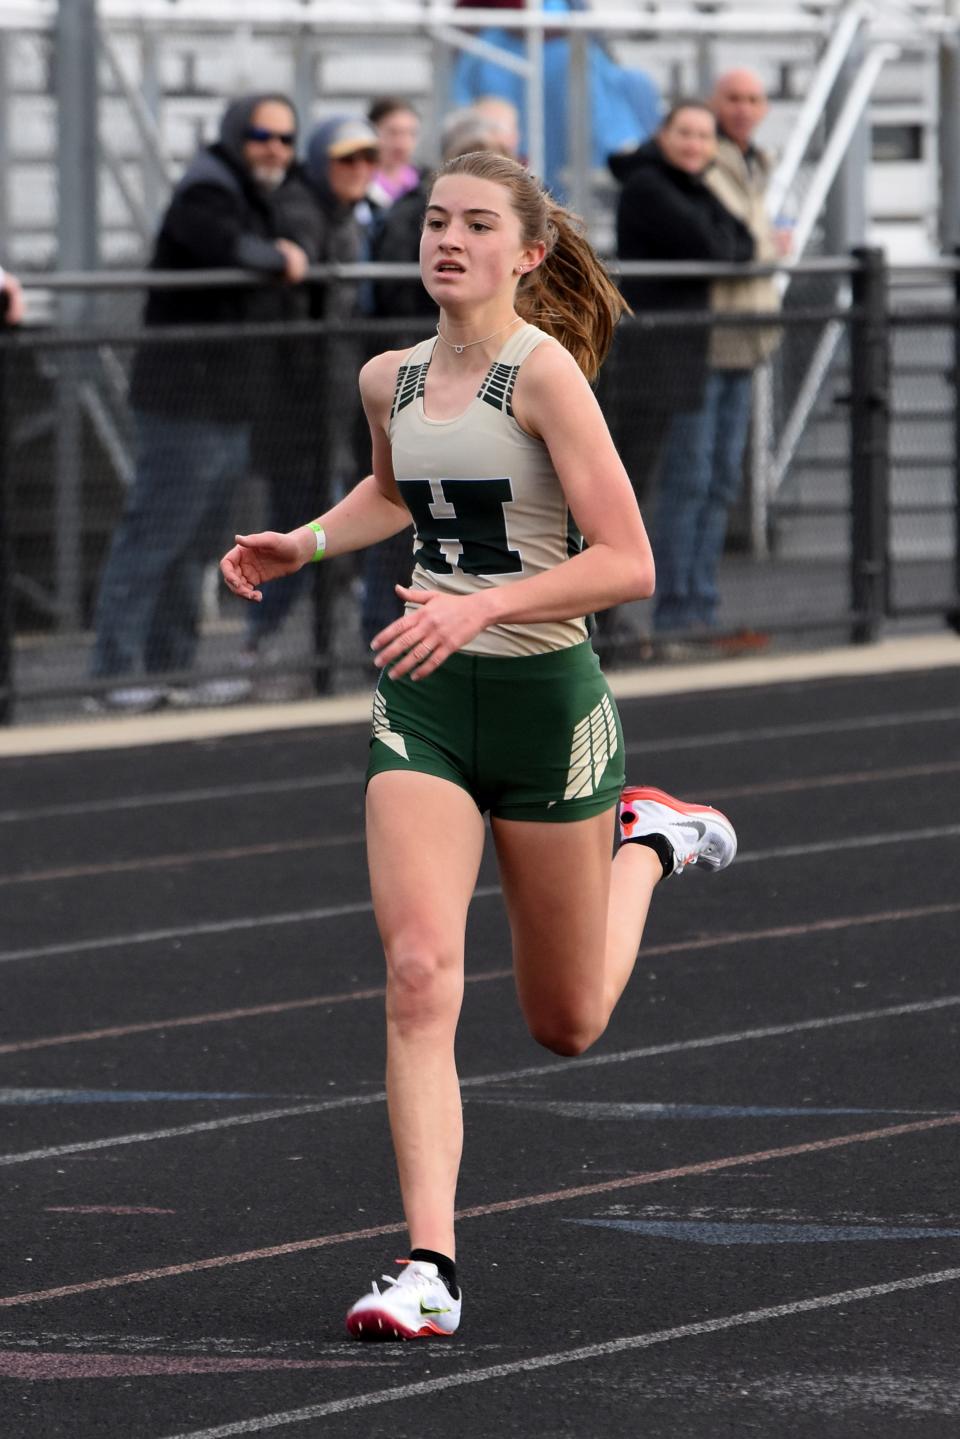 Mackenzie Wright set Howell records in the 1,600 and 3,200 in 2022.